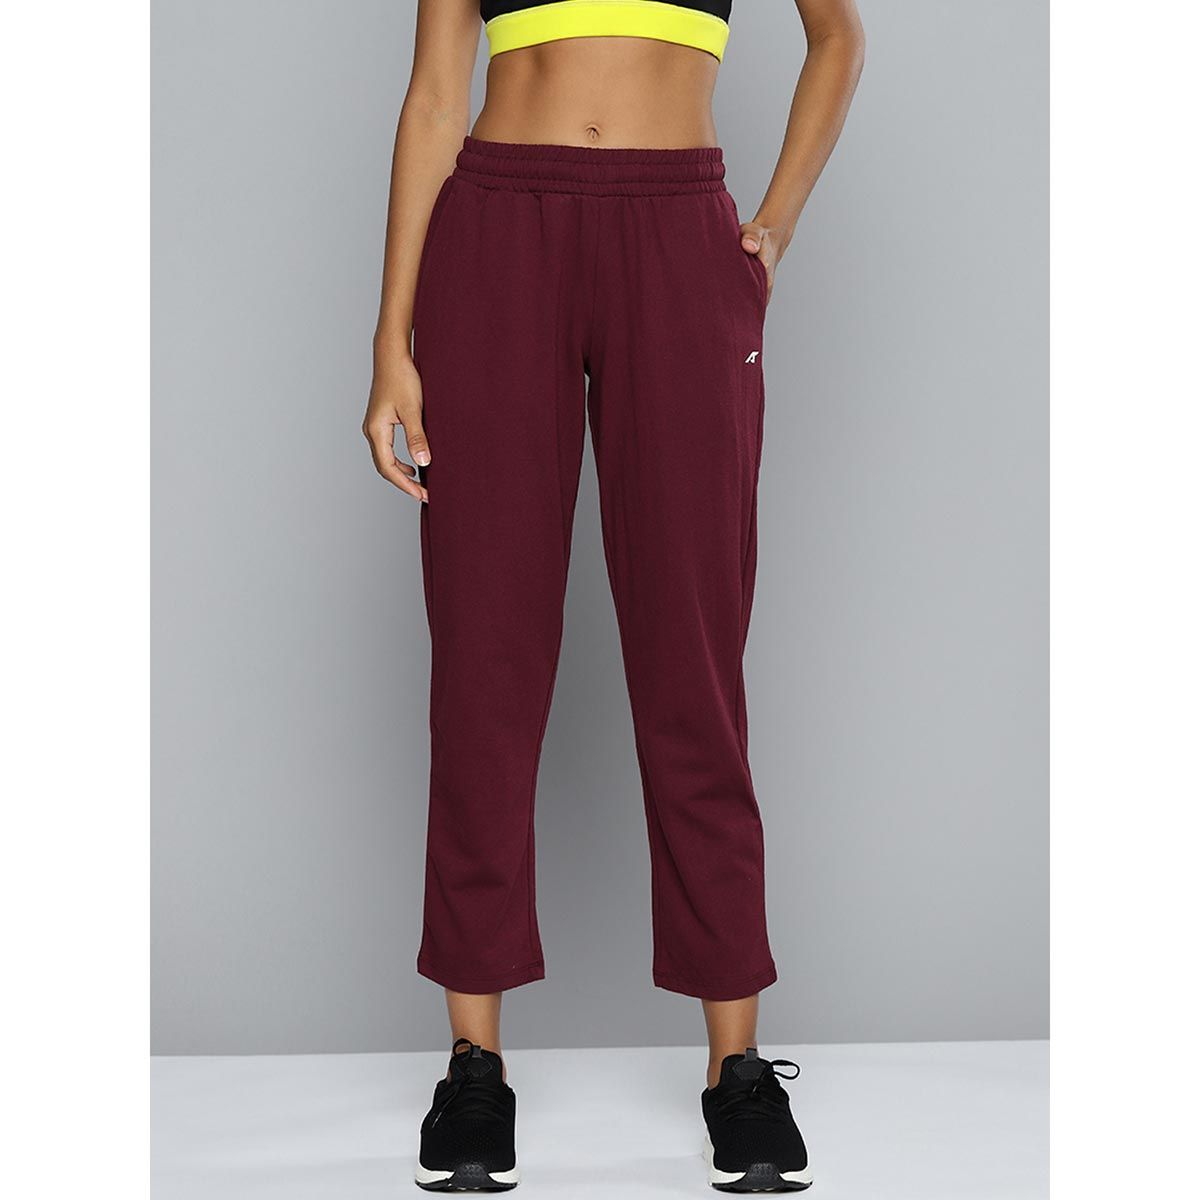 Trackpants Shop Women Sea Green Polyester Trackpants Online  Clithscom